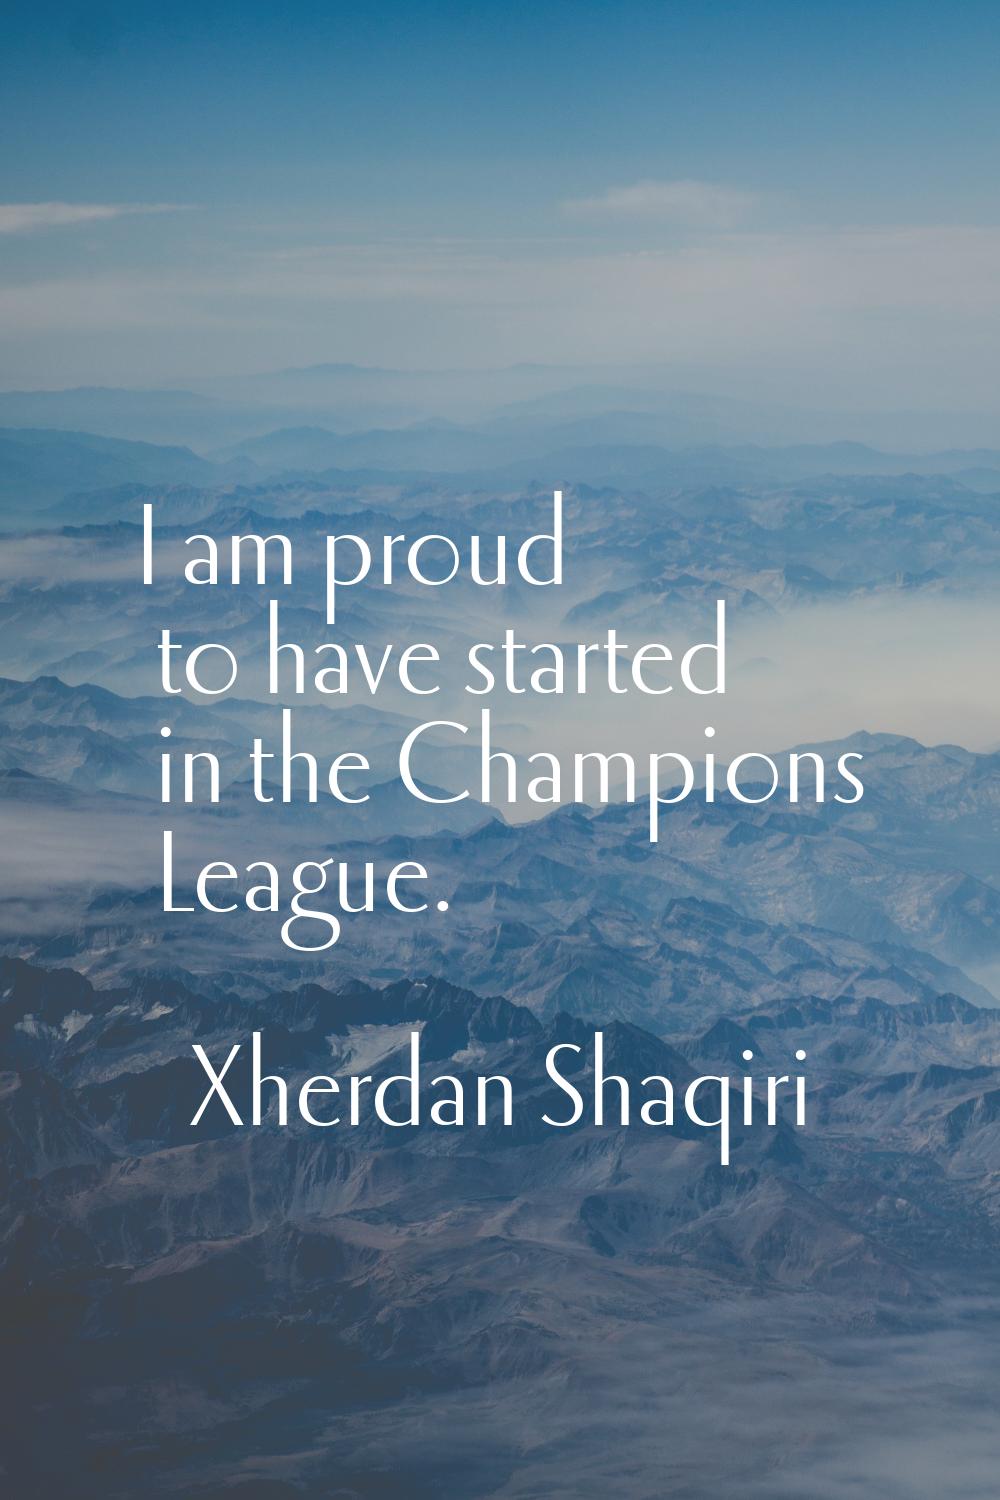 I am proud to have started in the Champions League.